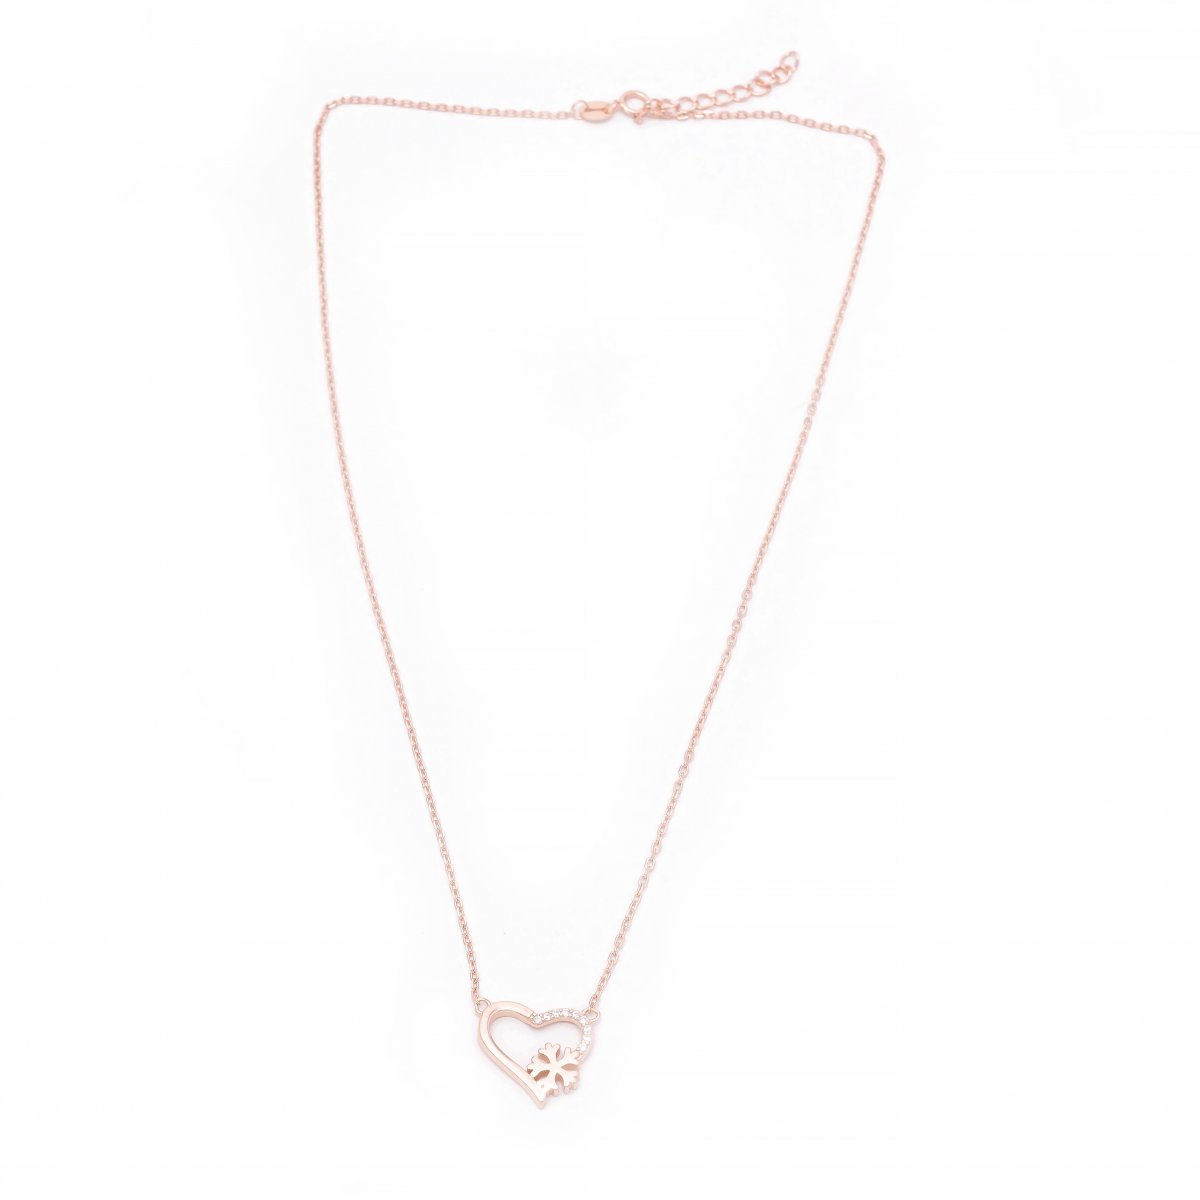 ROSE GOLD PENDANT CHARM CHAIN FOR WOMEN IN SILVER